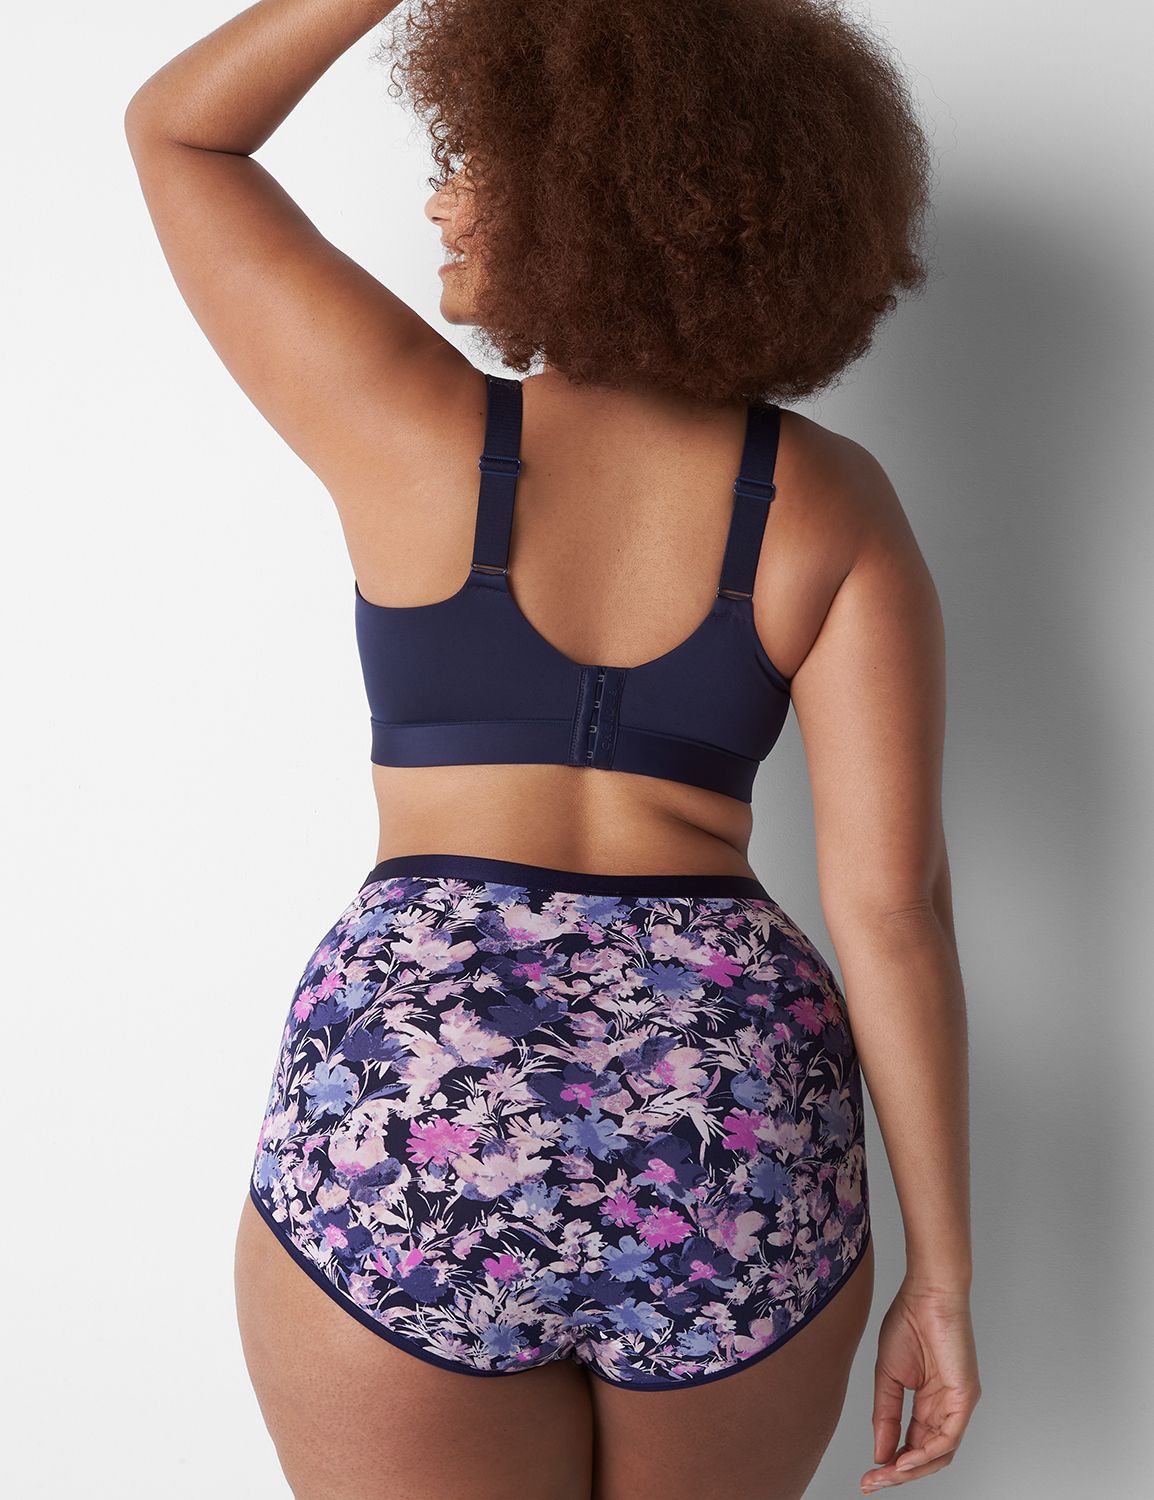 Lane Bryant - Oh, yeah! 7/$35 panties are back — but only for two